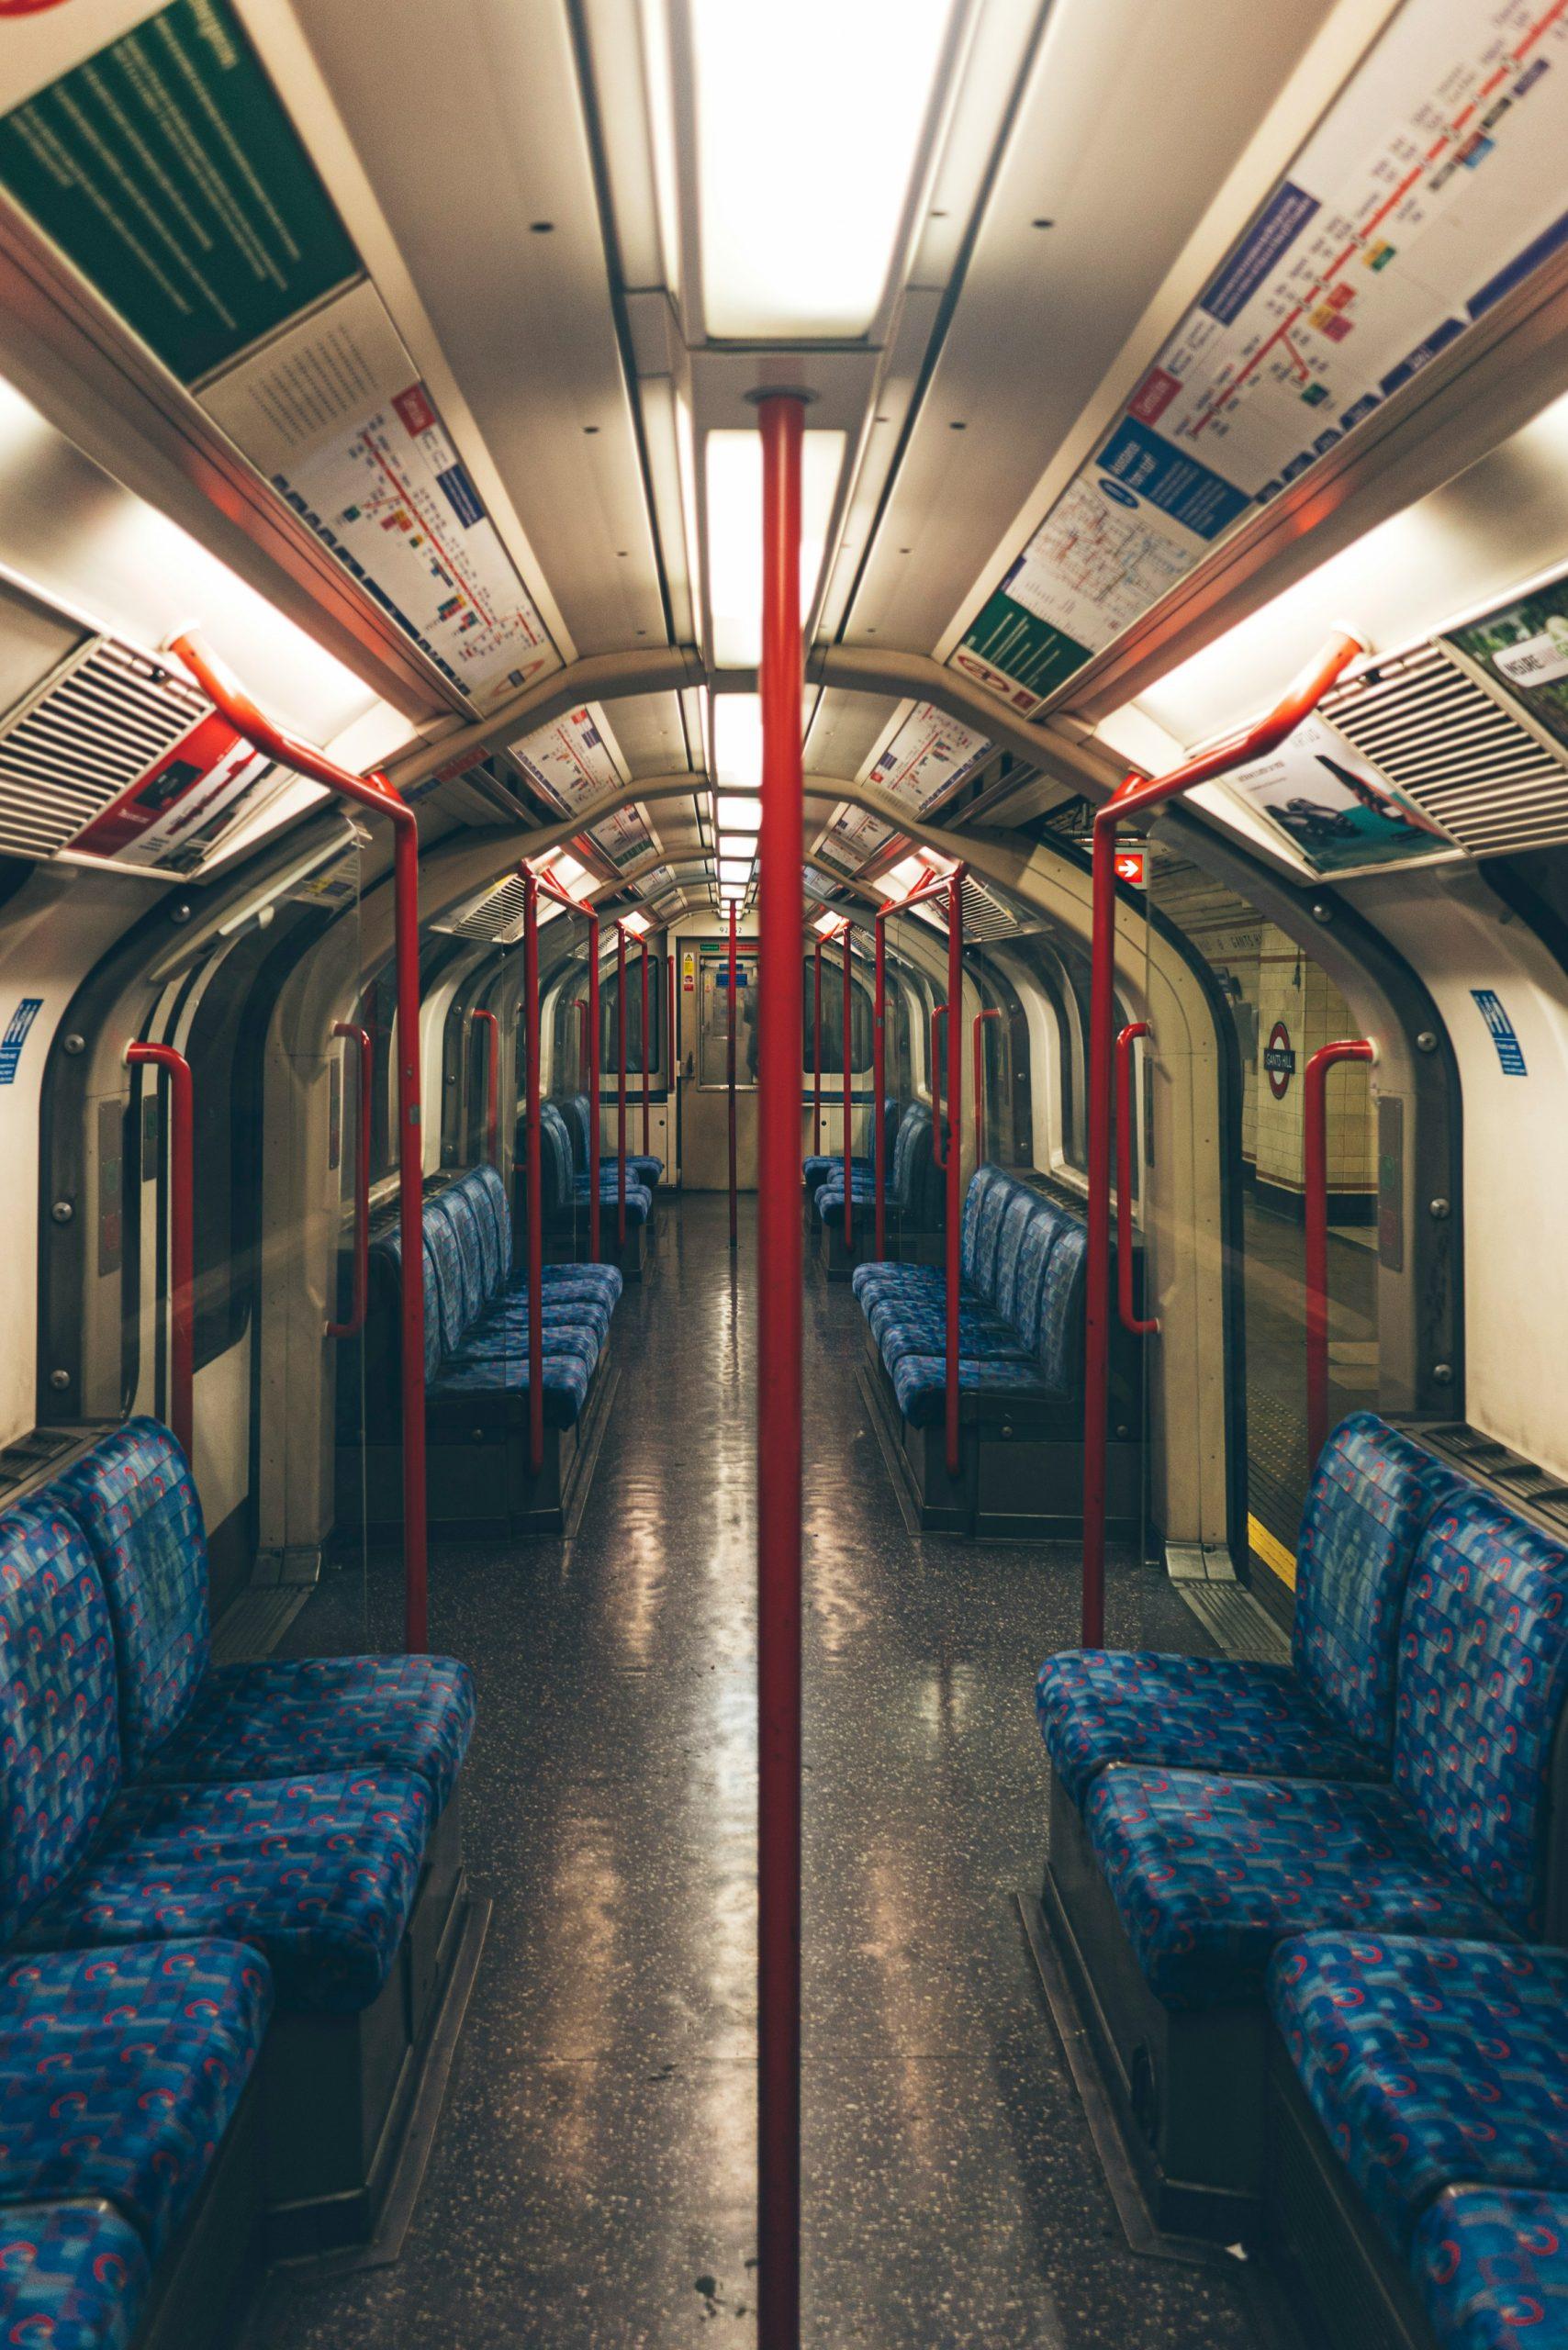 an image of an empty underground train. The seats are blue